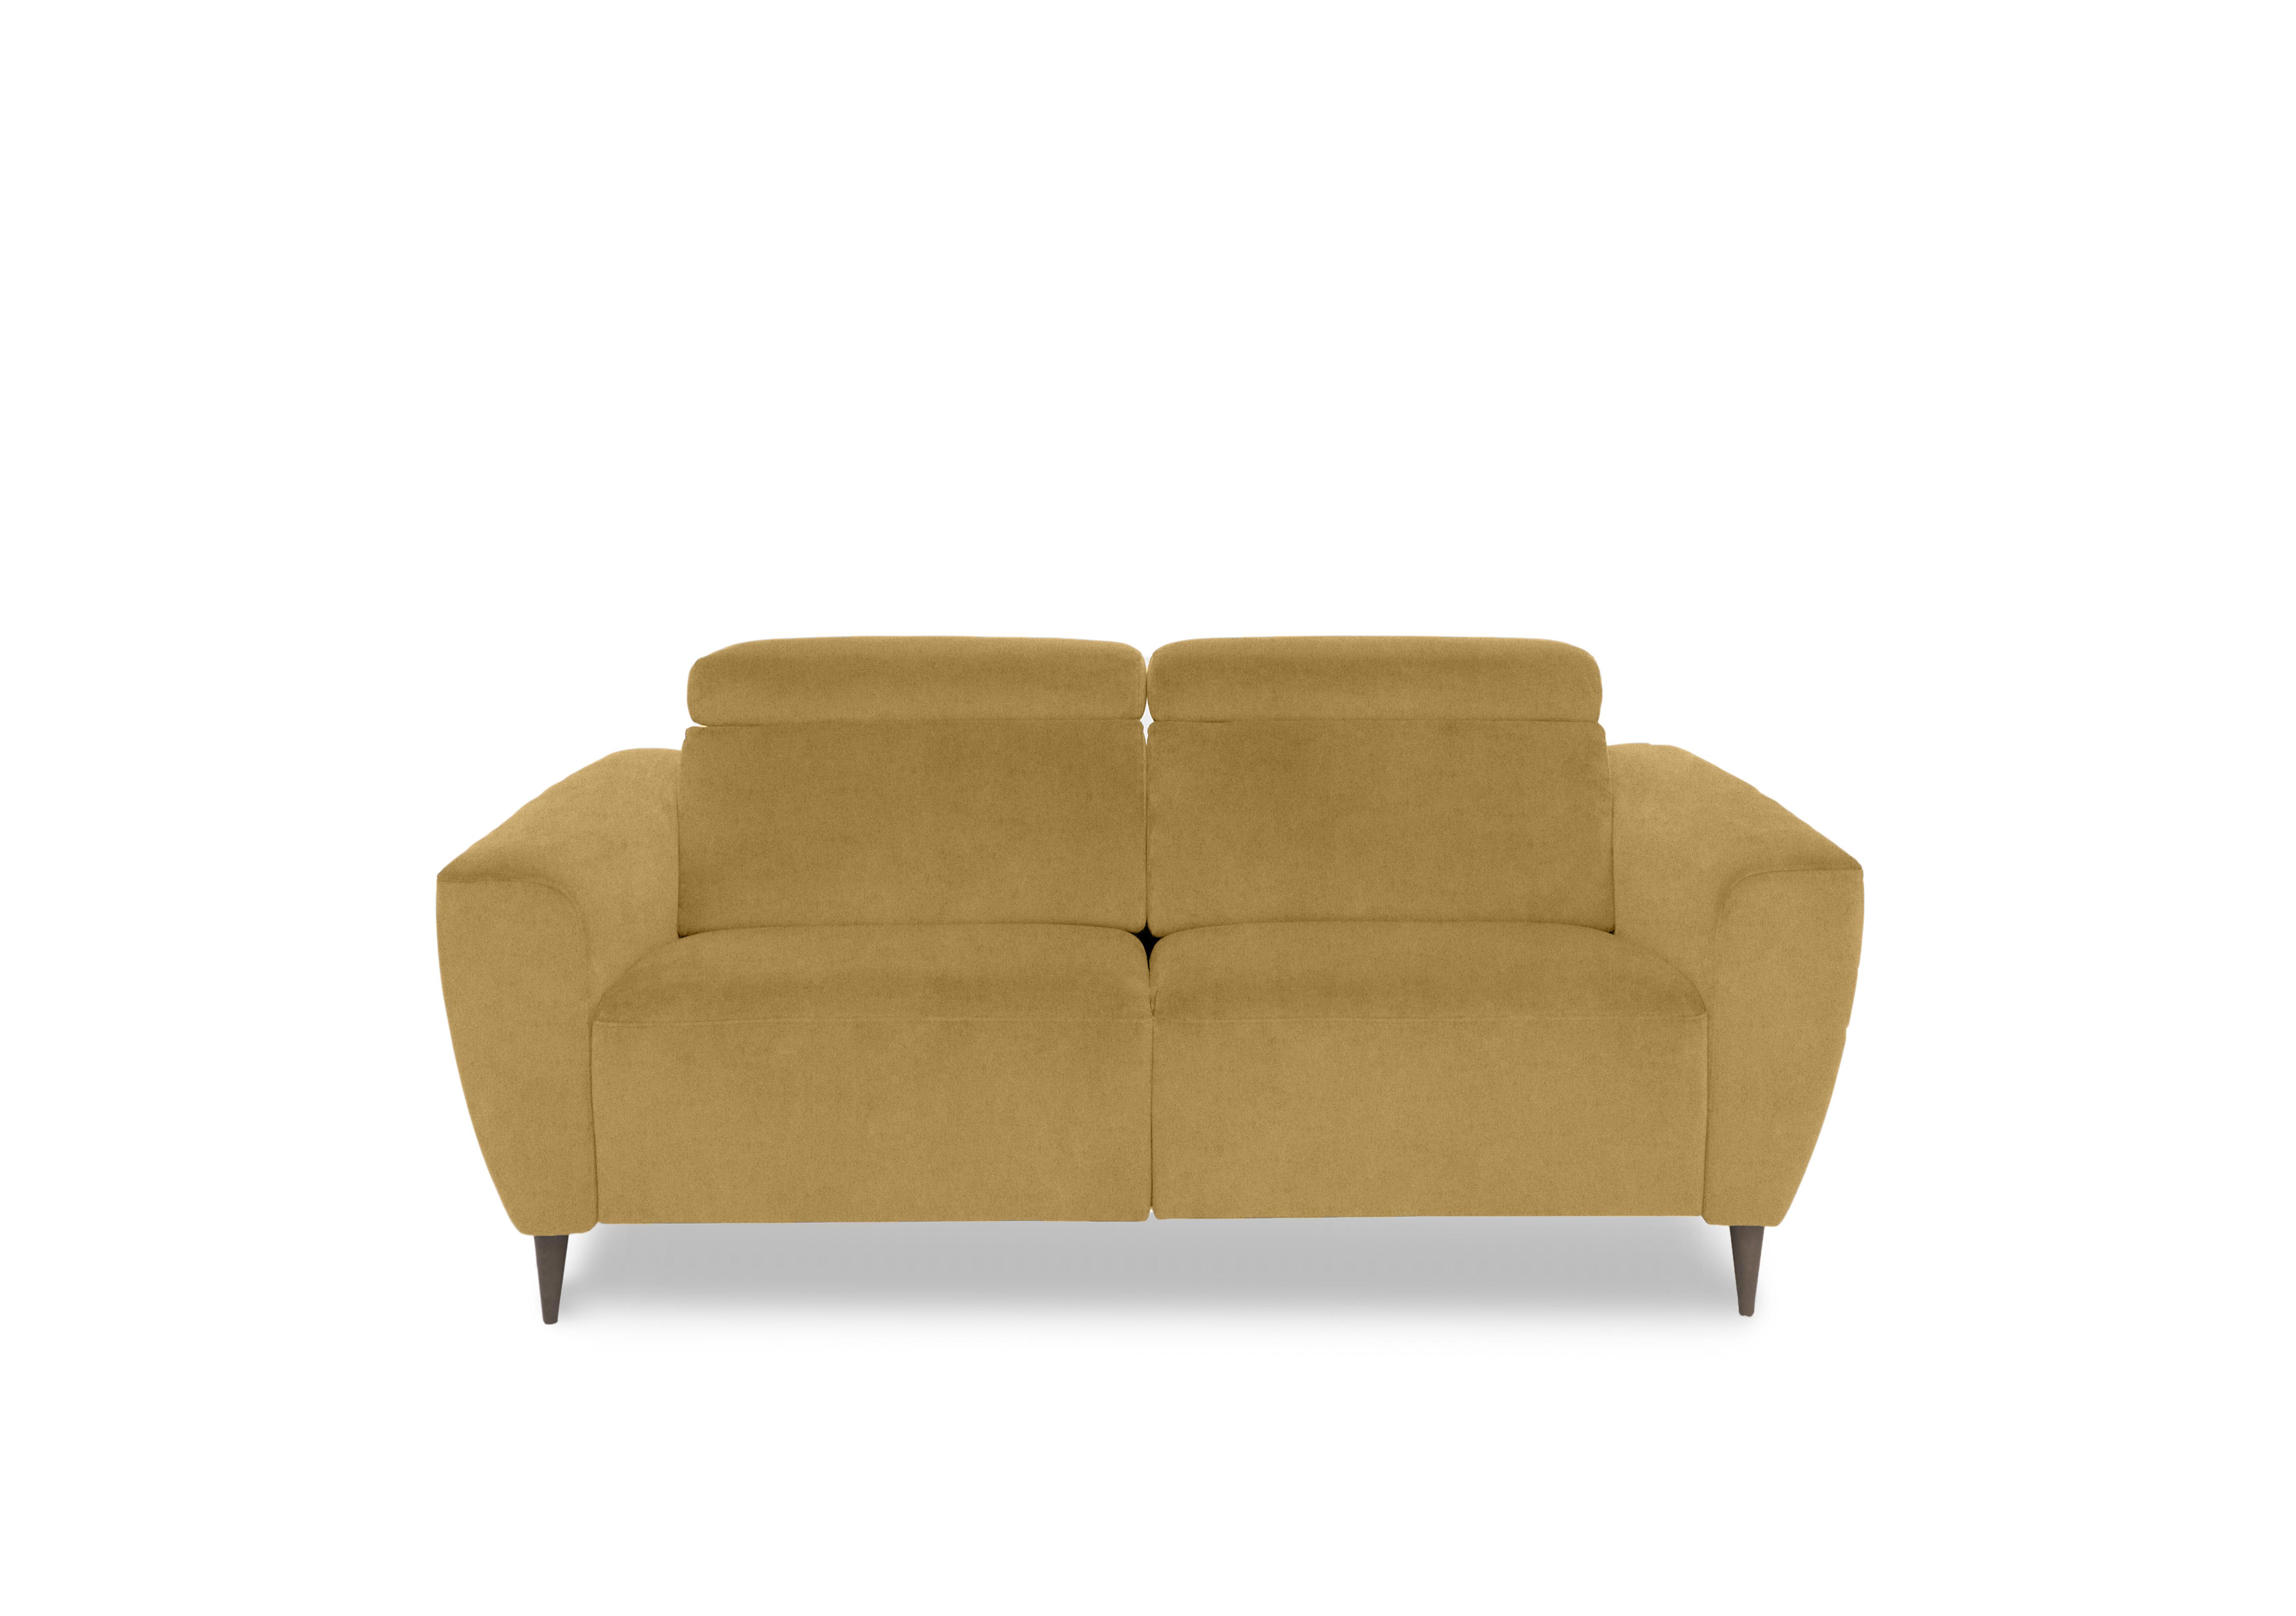 Milano 2 Seater Fabric Sofa in Fuente Mostaza To Ft on Furniture Village